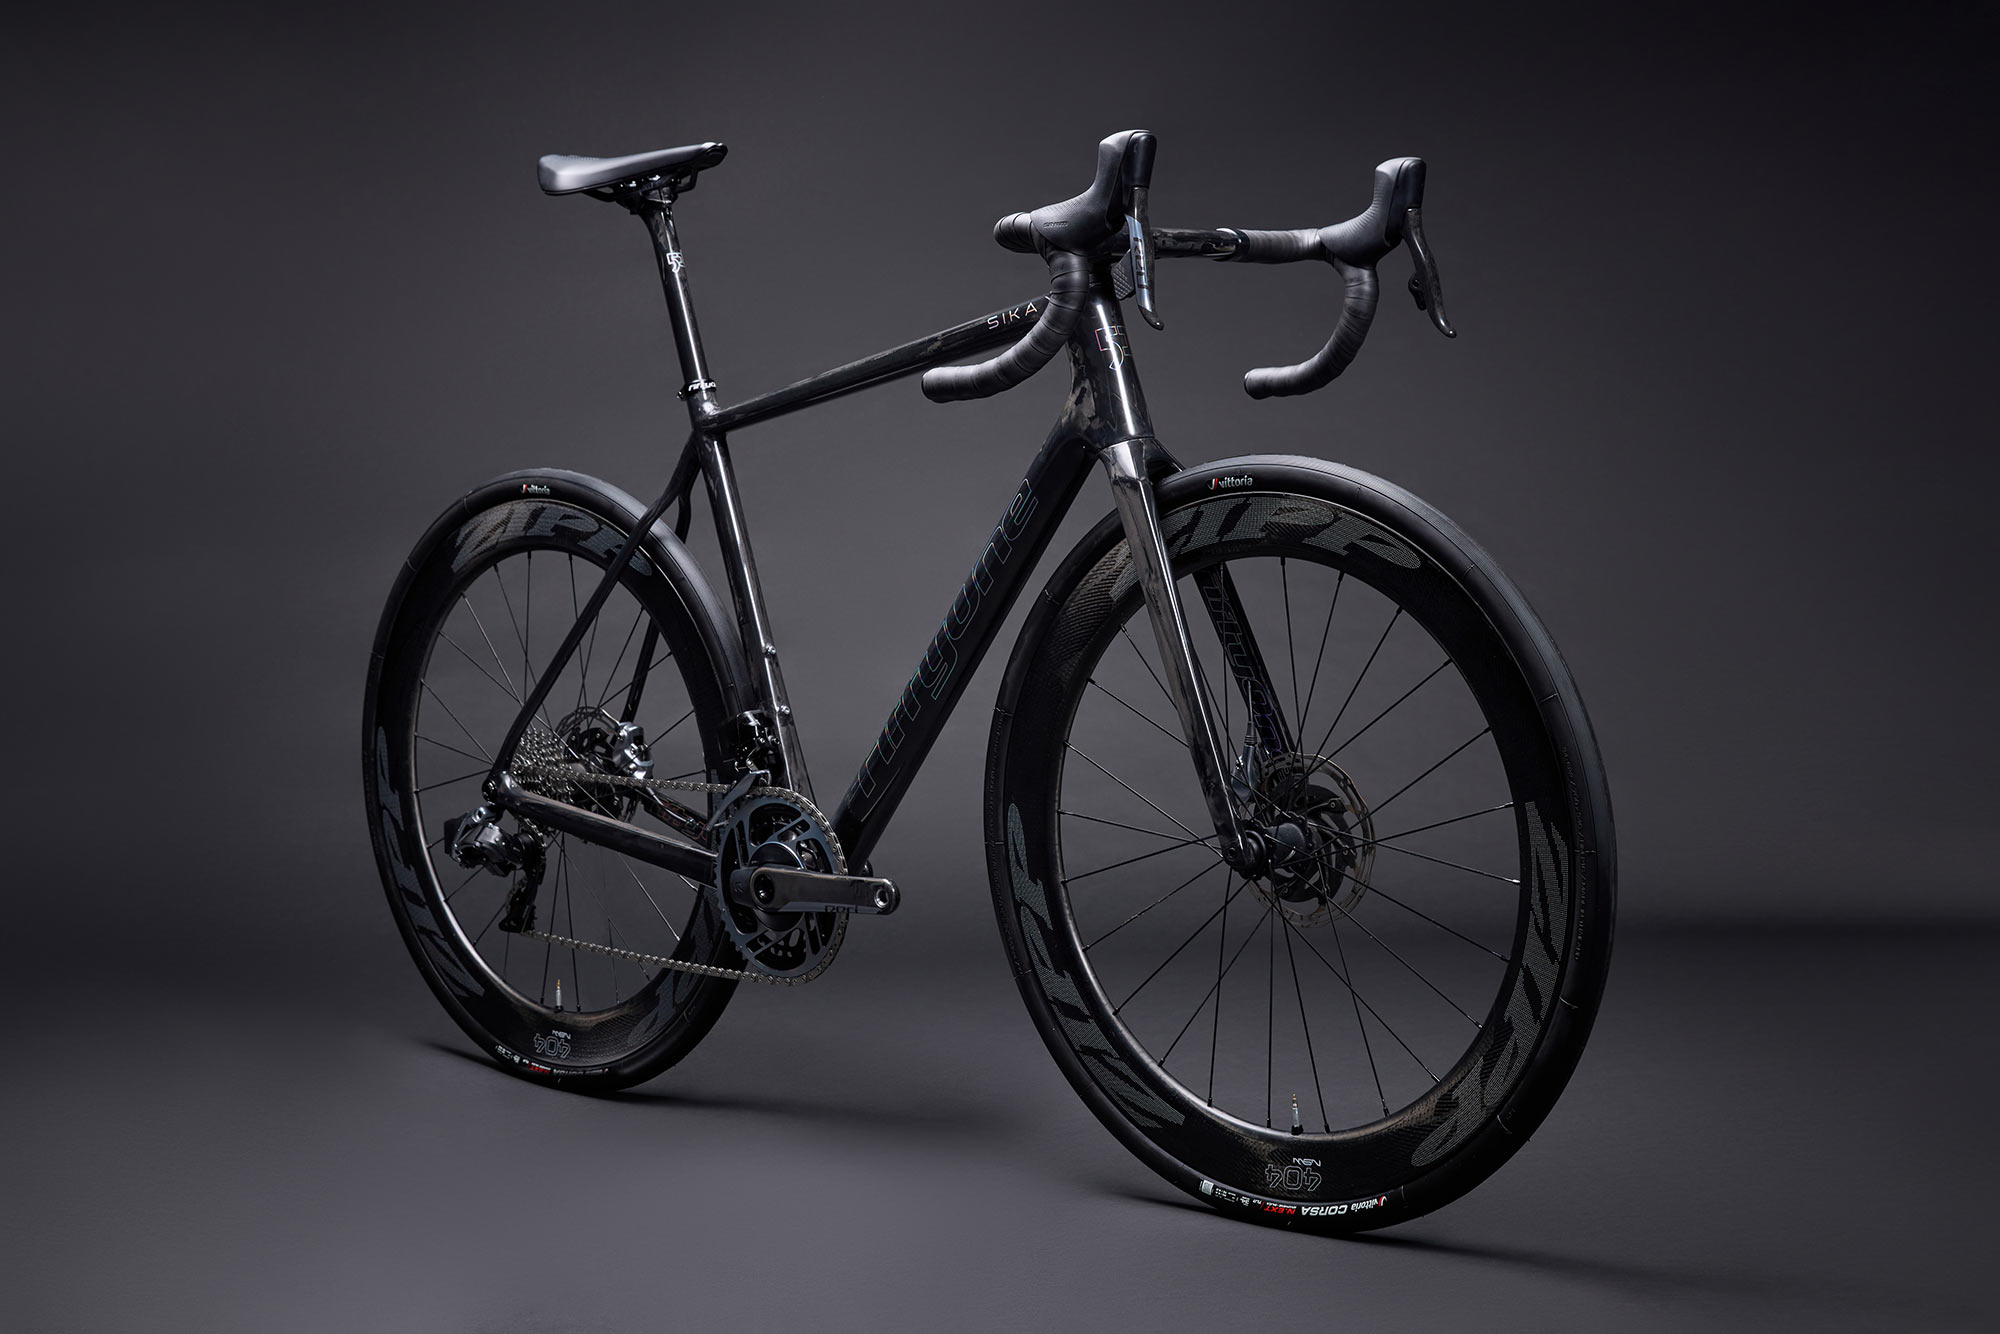 FiftyOne Sika is a 690g pro-level road bike for real riders